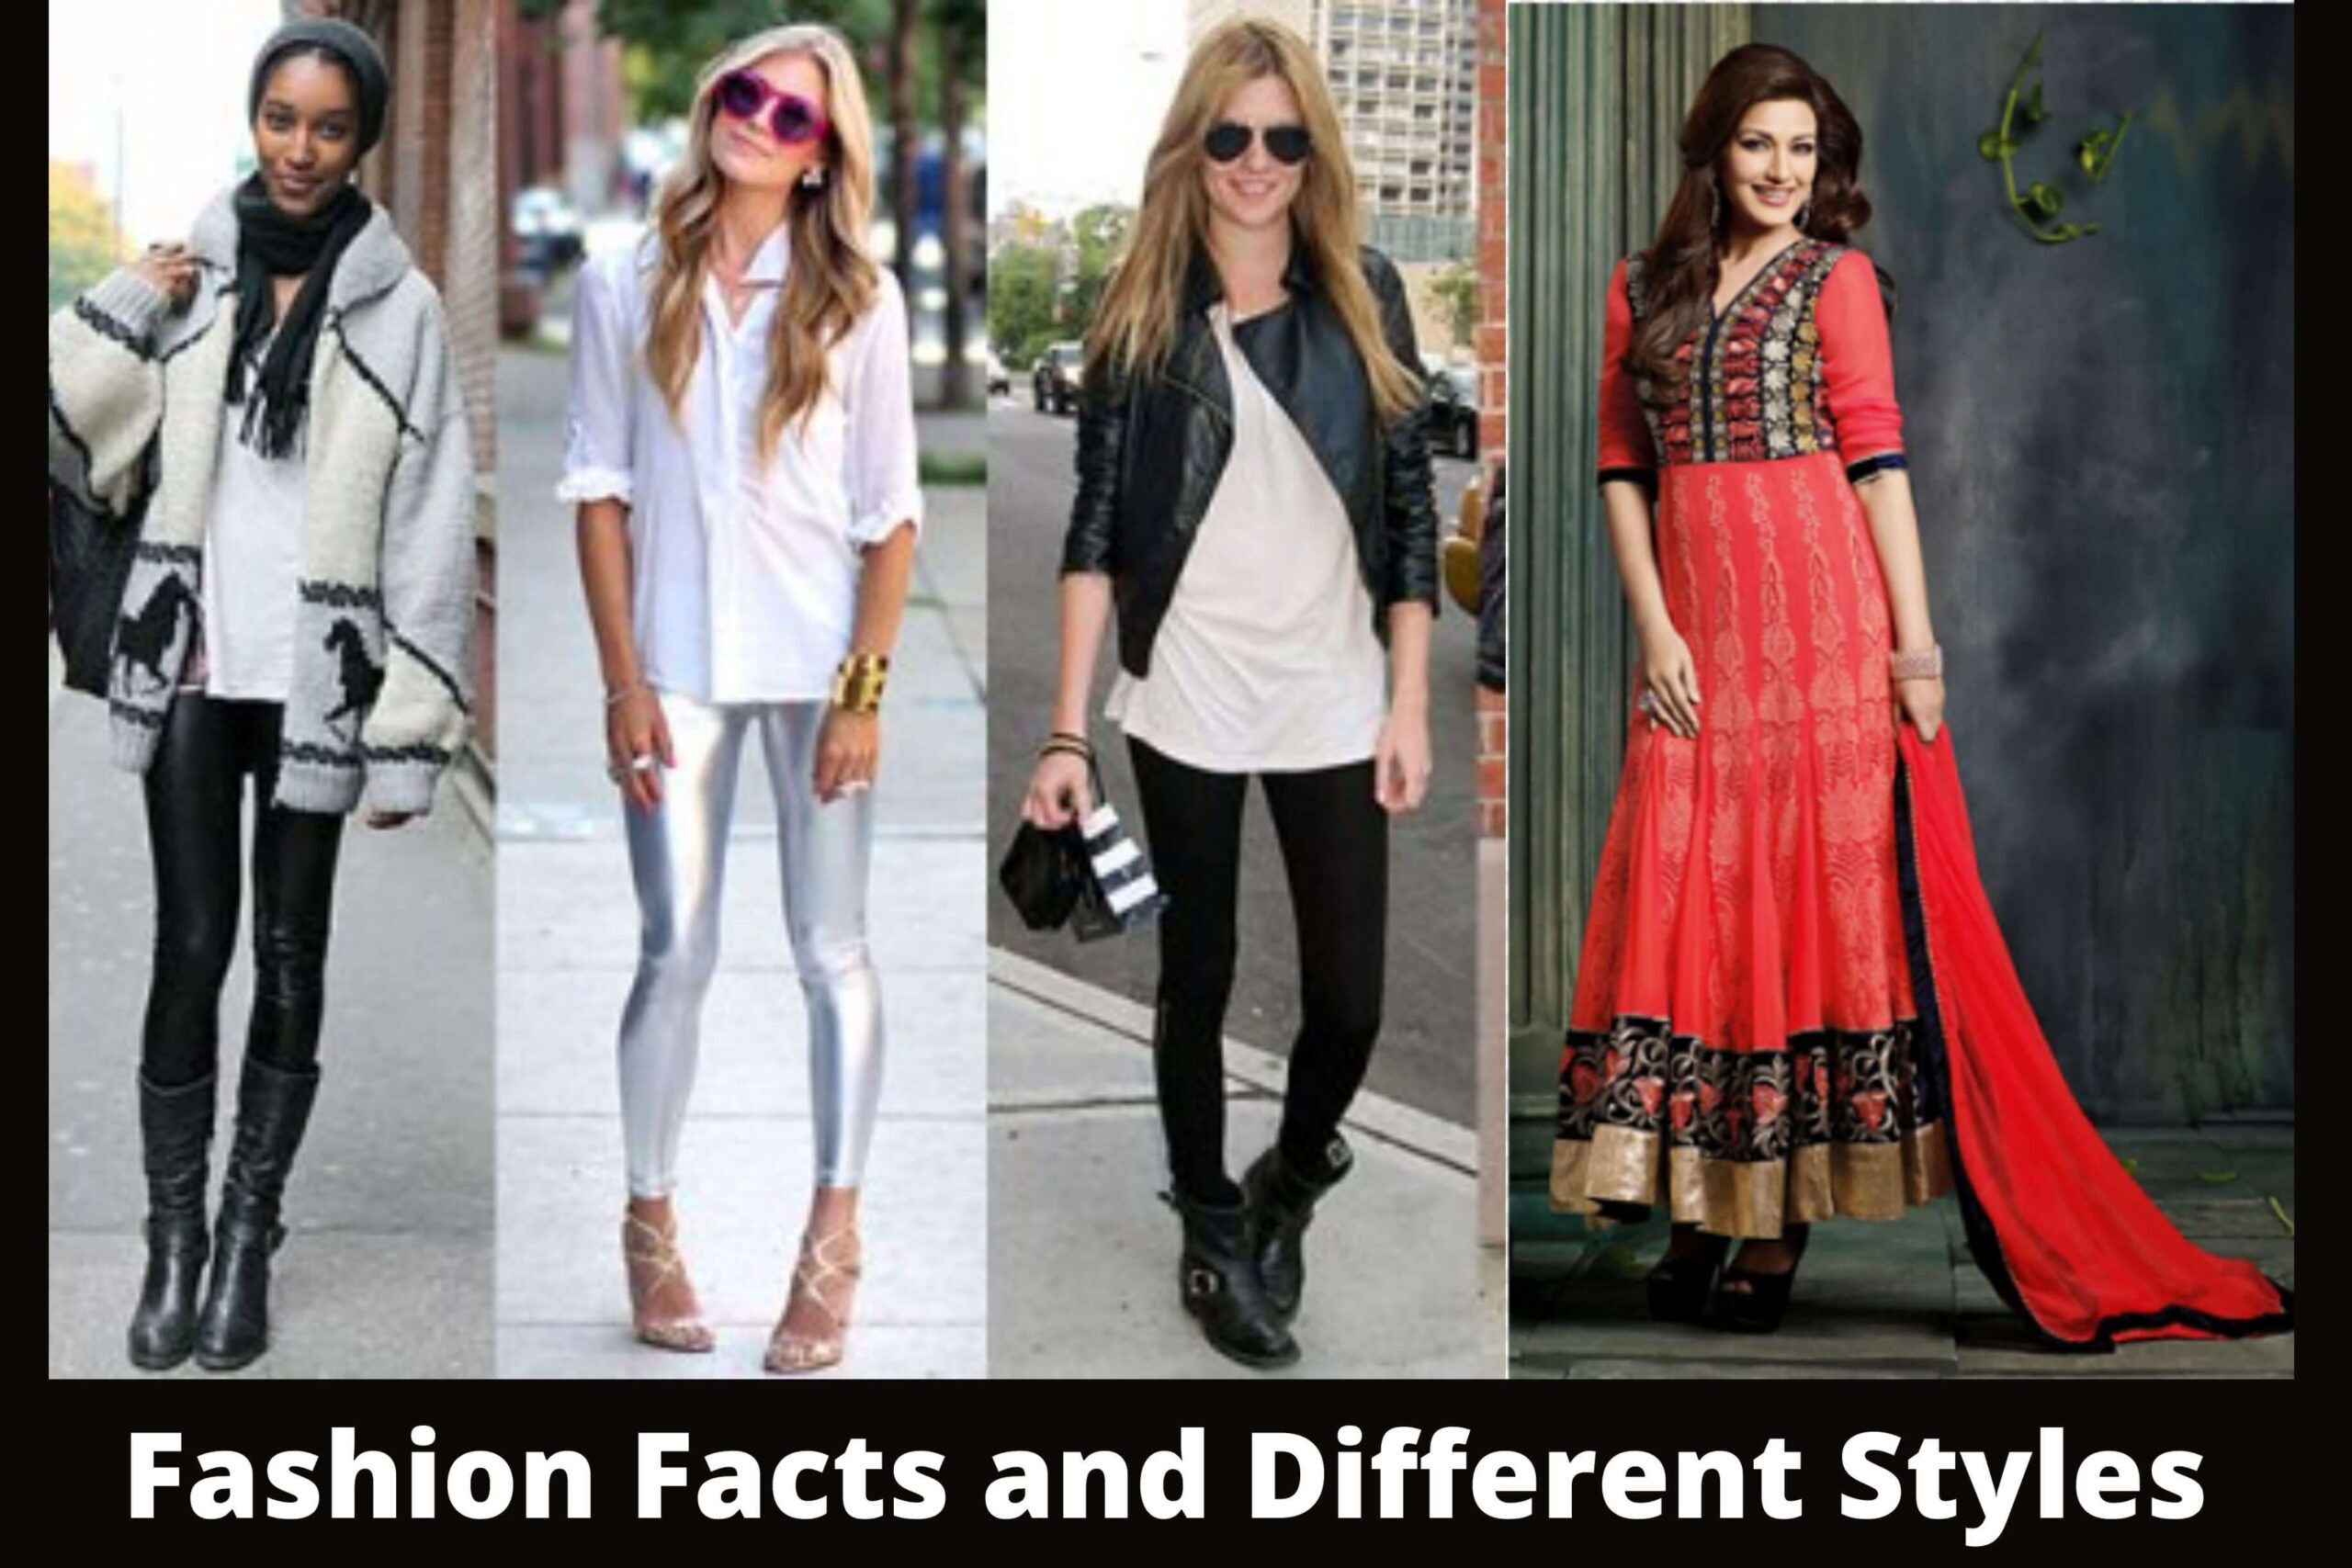 Know here fashion facts